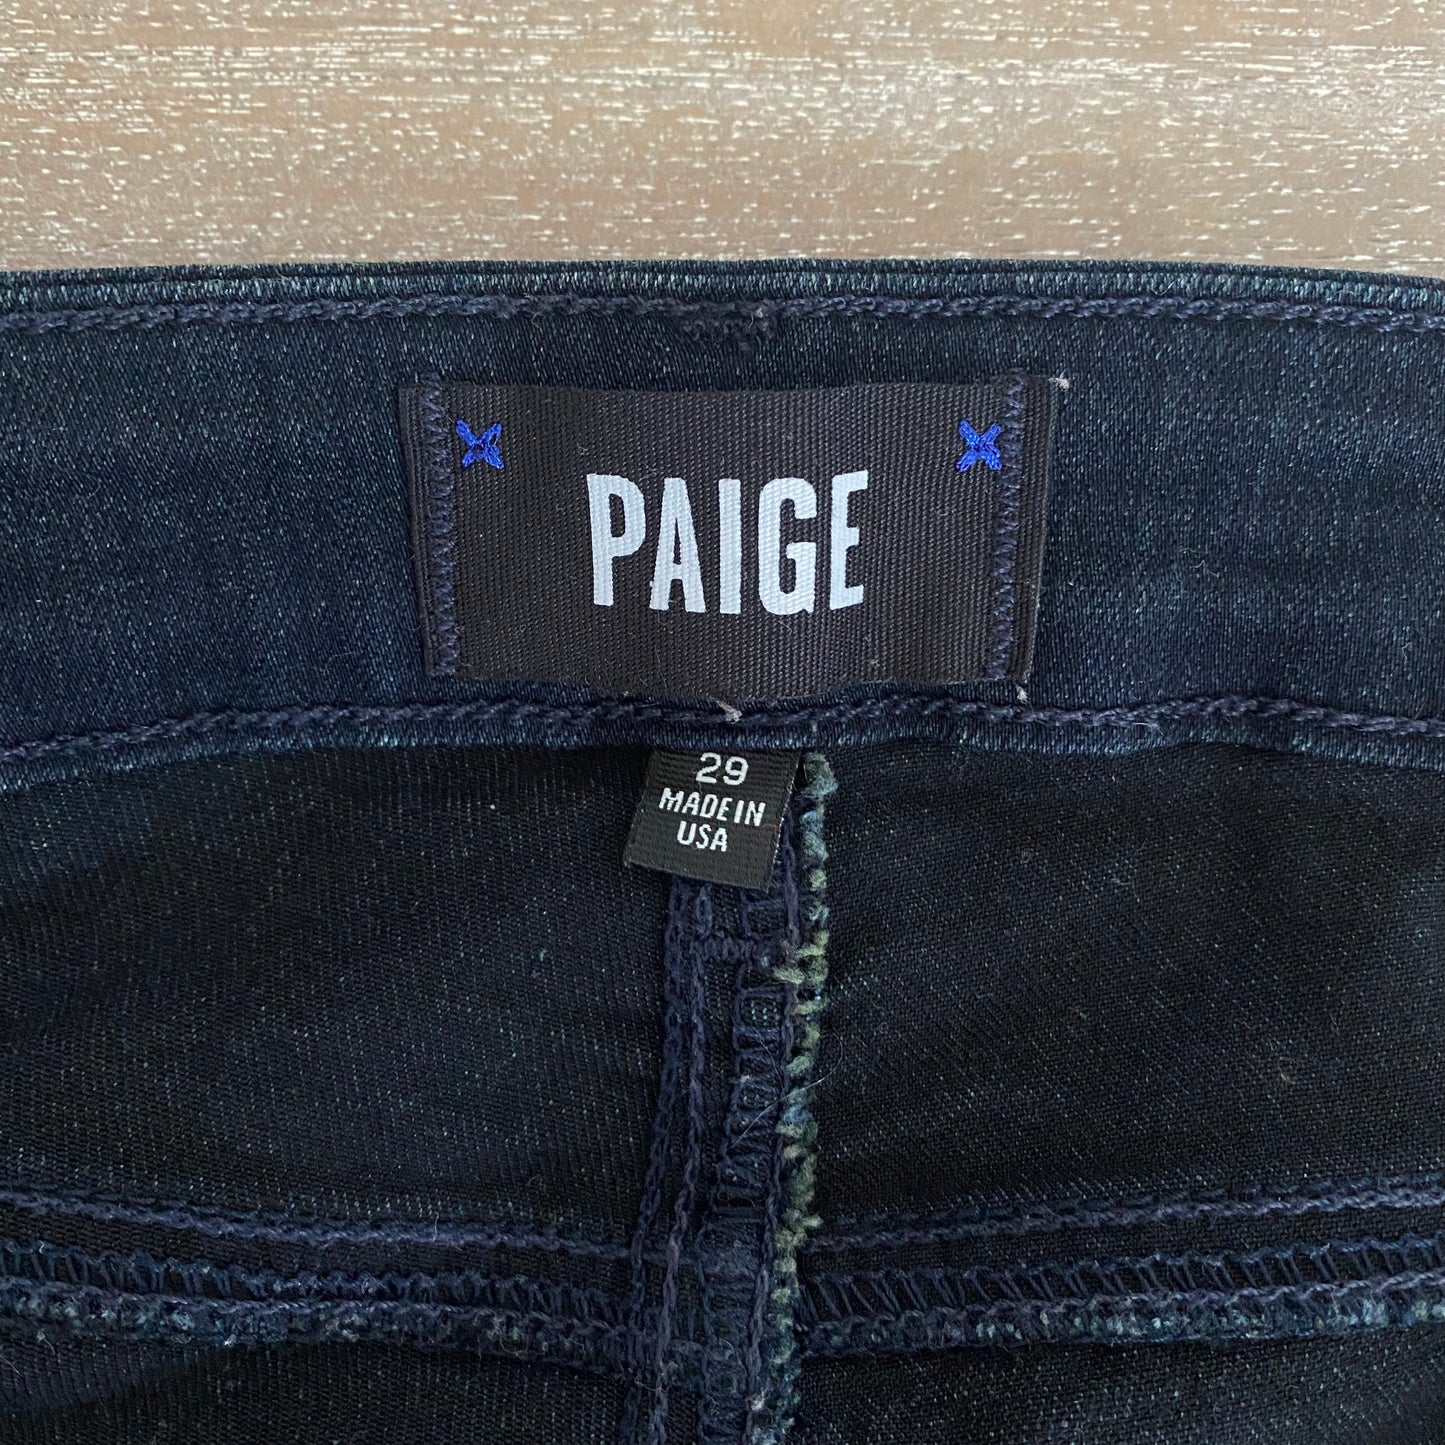 PAIGE Margot Ankle High Rise Jeans Size 29